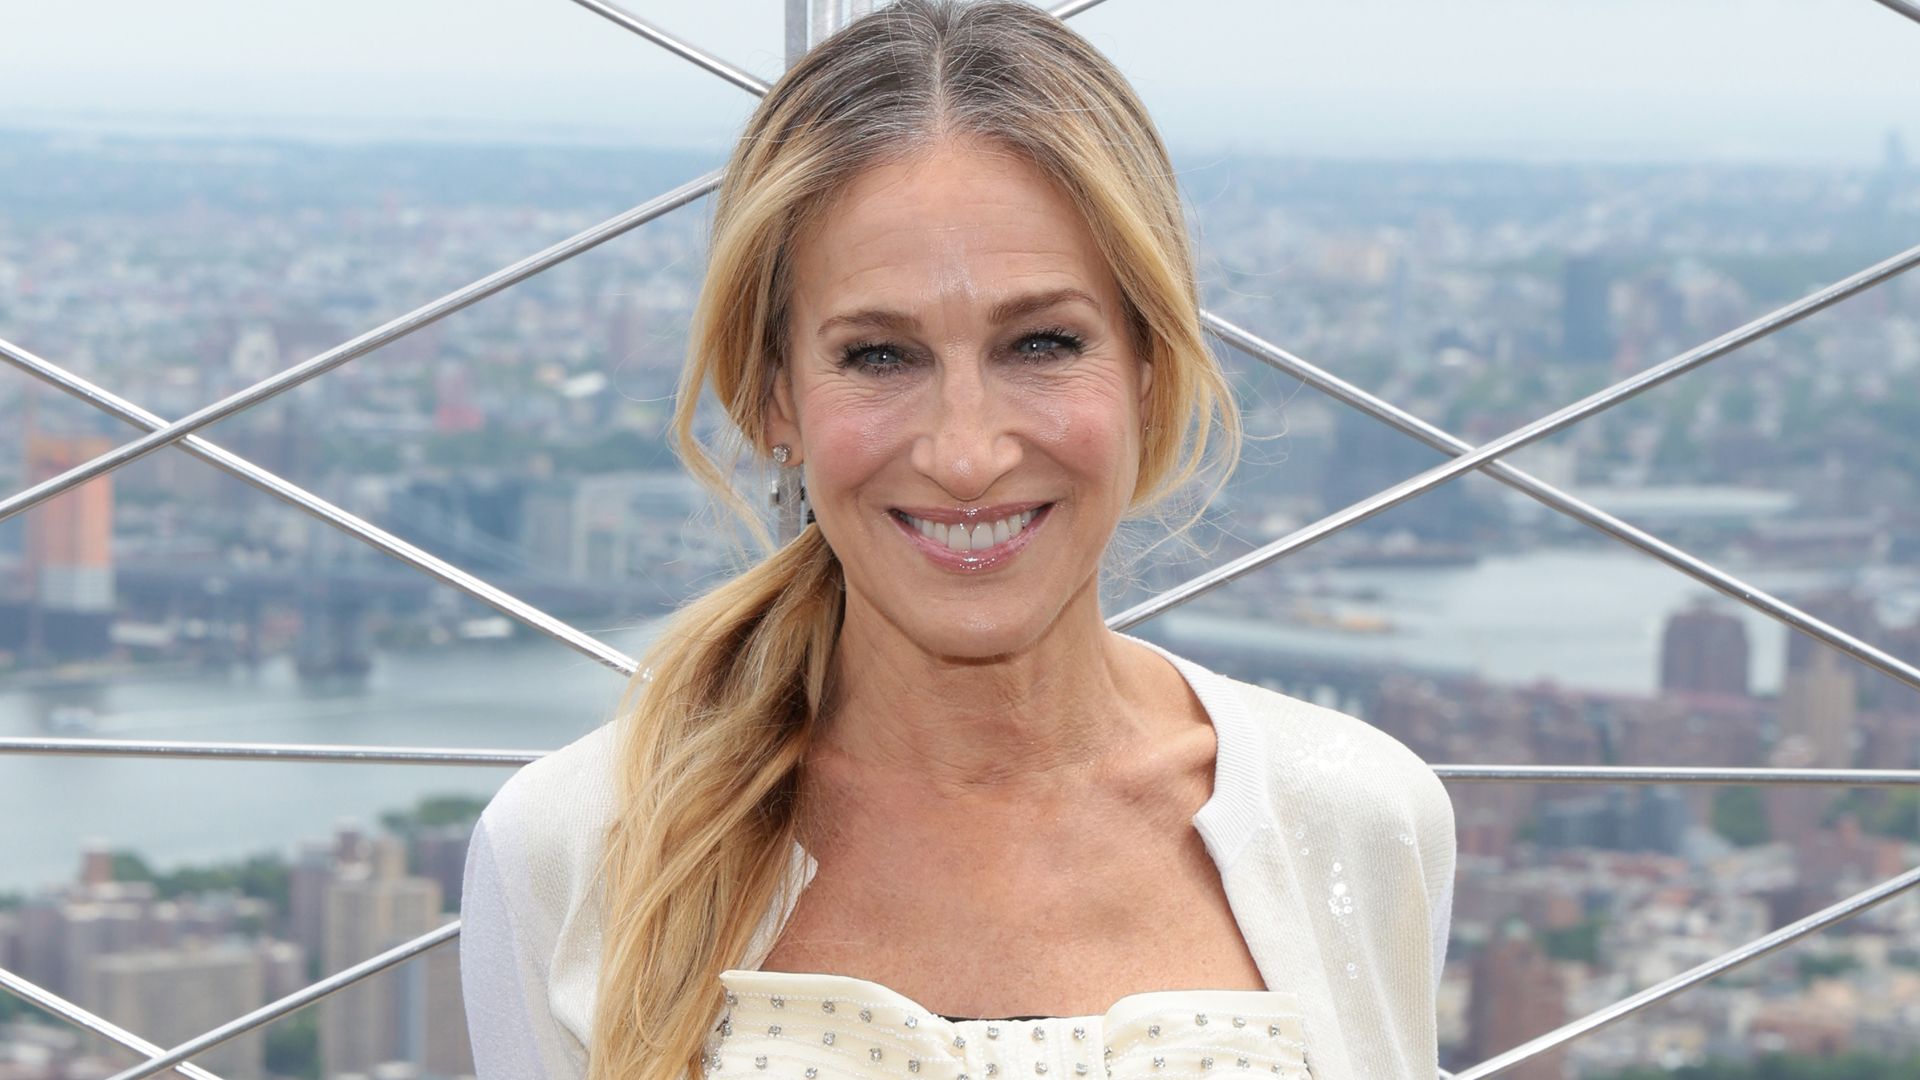 Sarah Jessica Parker smiling at the top of the empire state building